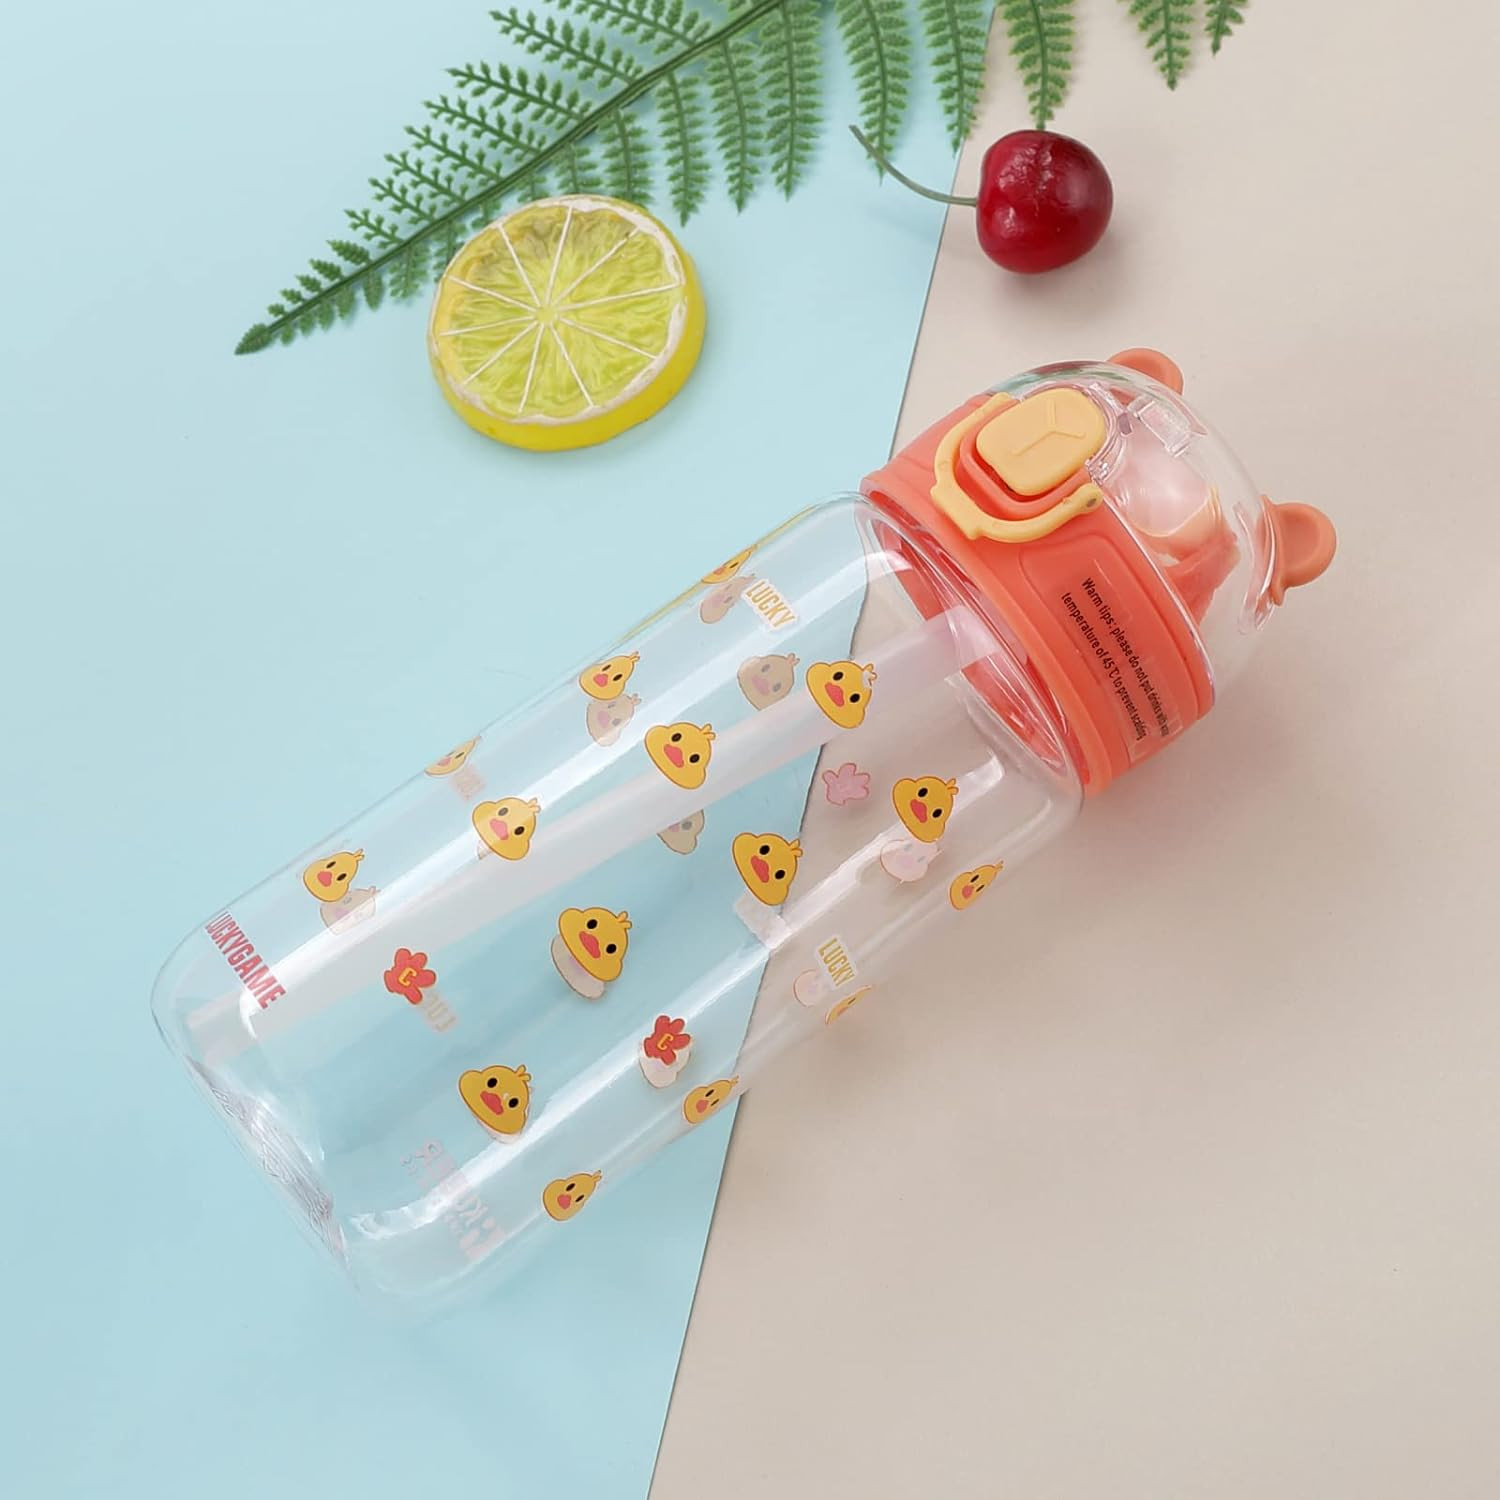 Kuber Sipper Bottle with Straw for Kids | Teddy Tumbler Sipper Cup I Cute Water Bottle with Lid | Food Grade Plastic | One Click Open | Leak Proof, BPA Free | 550 ml I School Boys Girls (Transparent)